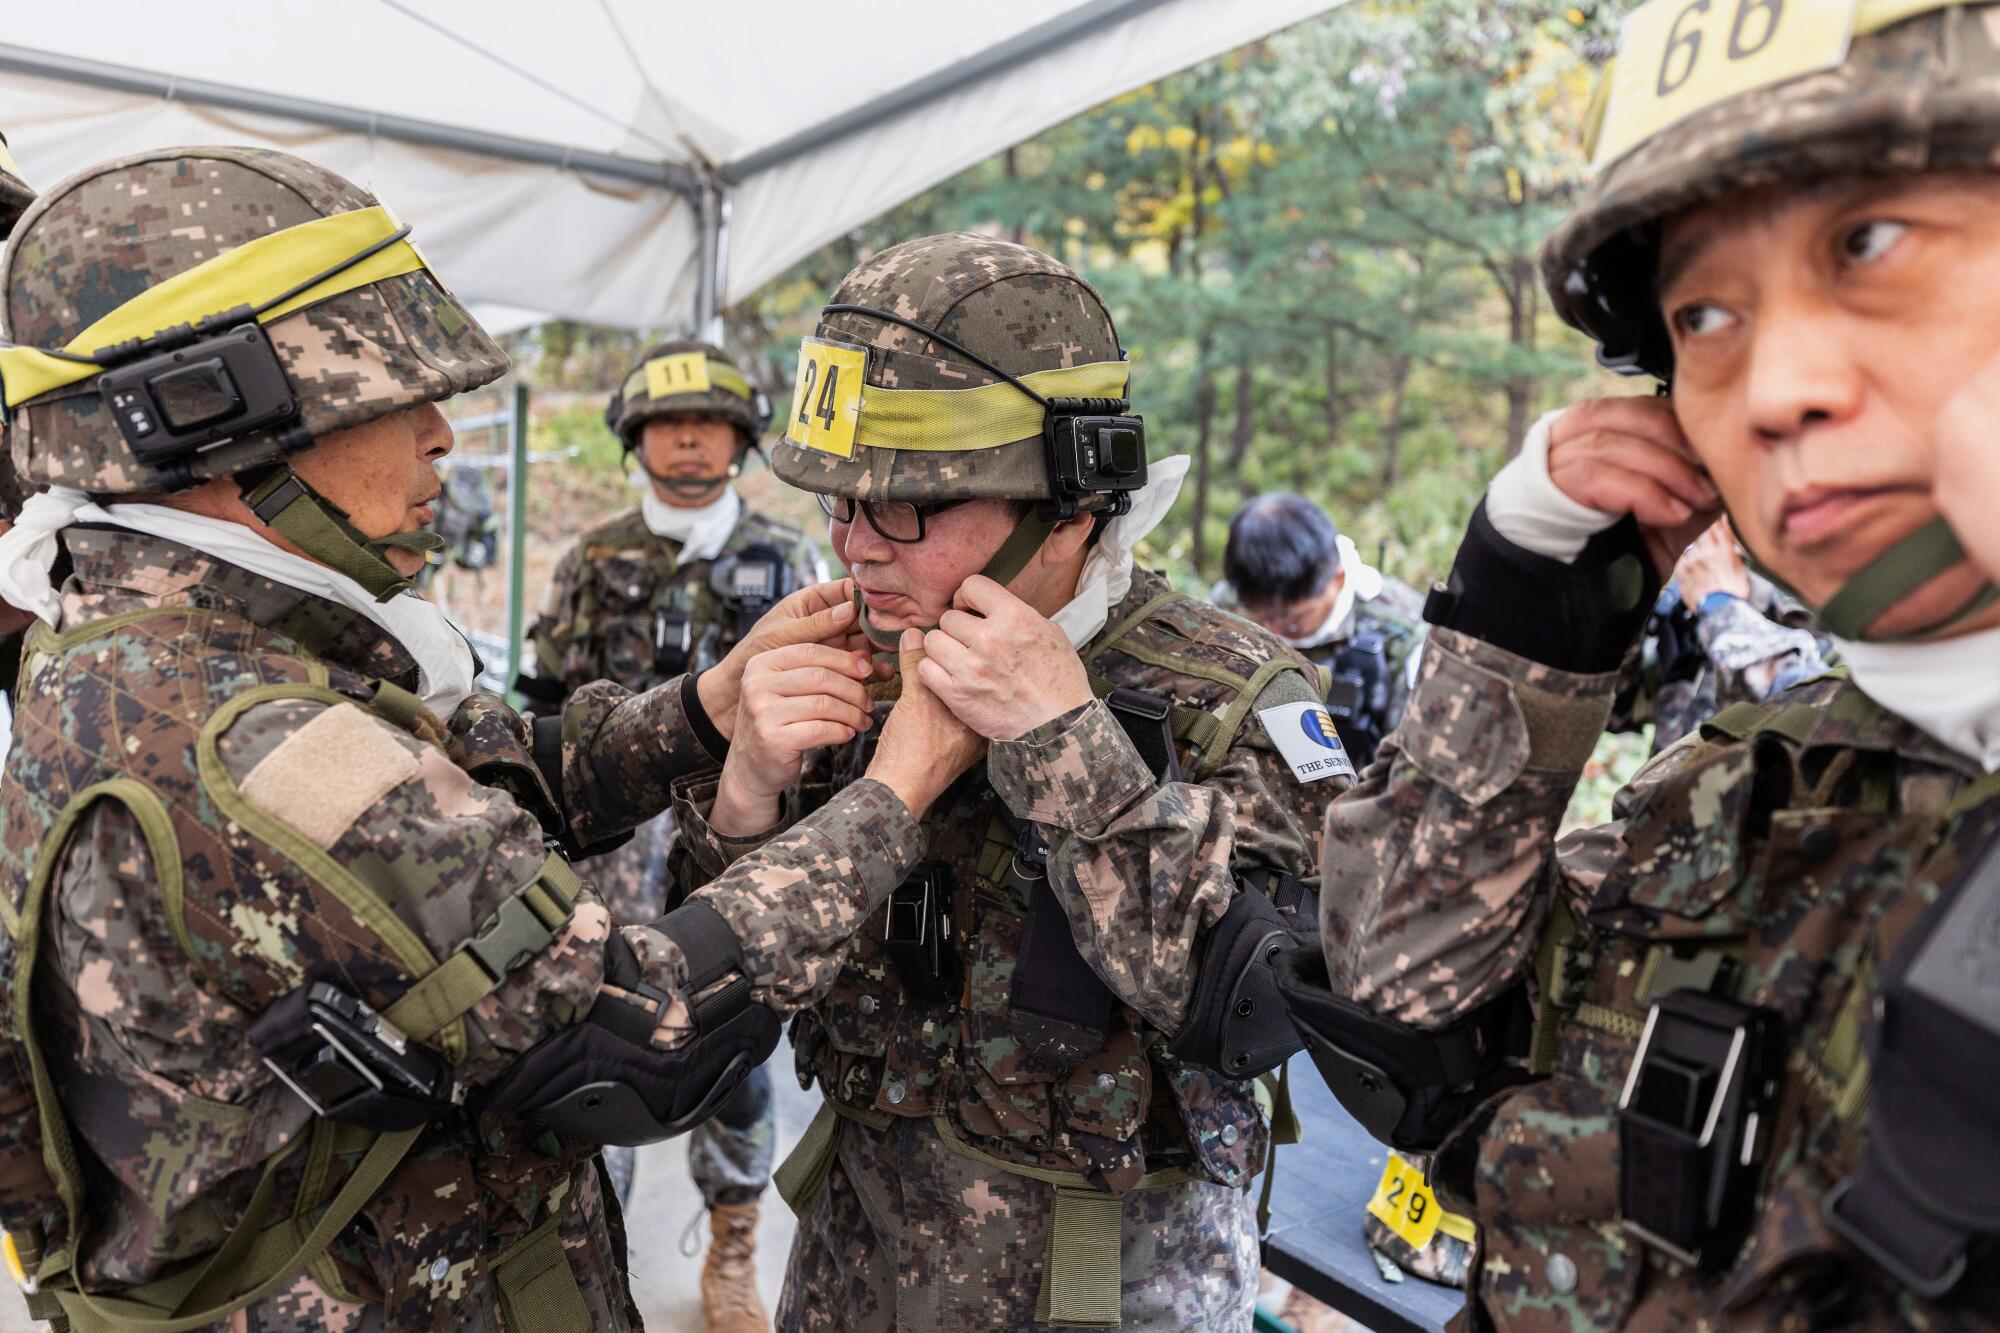 Members of the Senior Army help each other don protective gear during military training at the